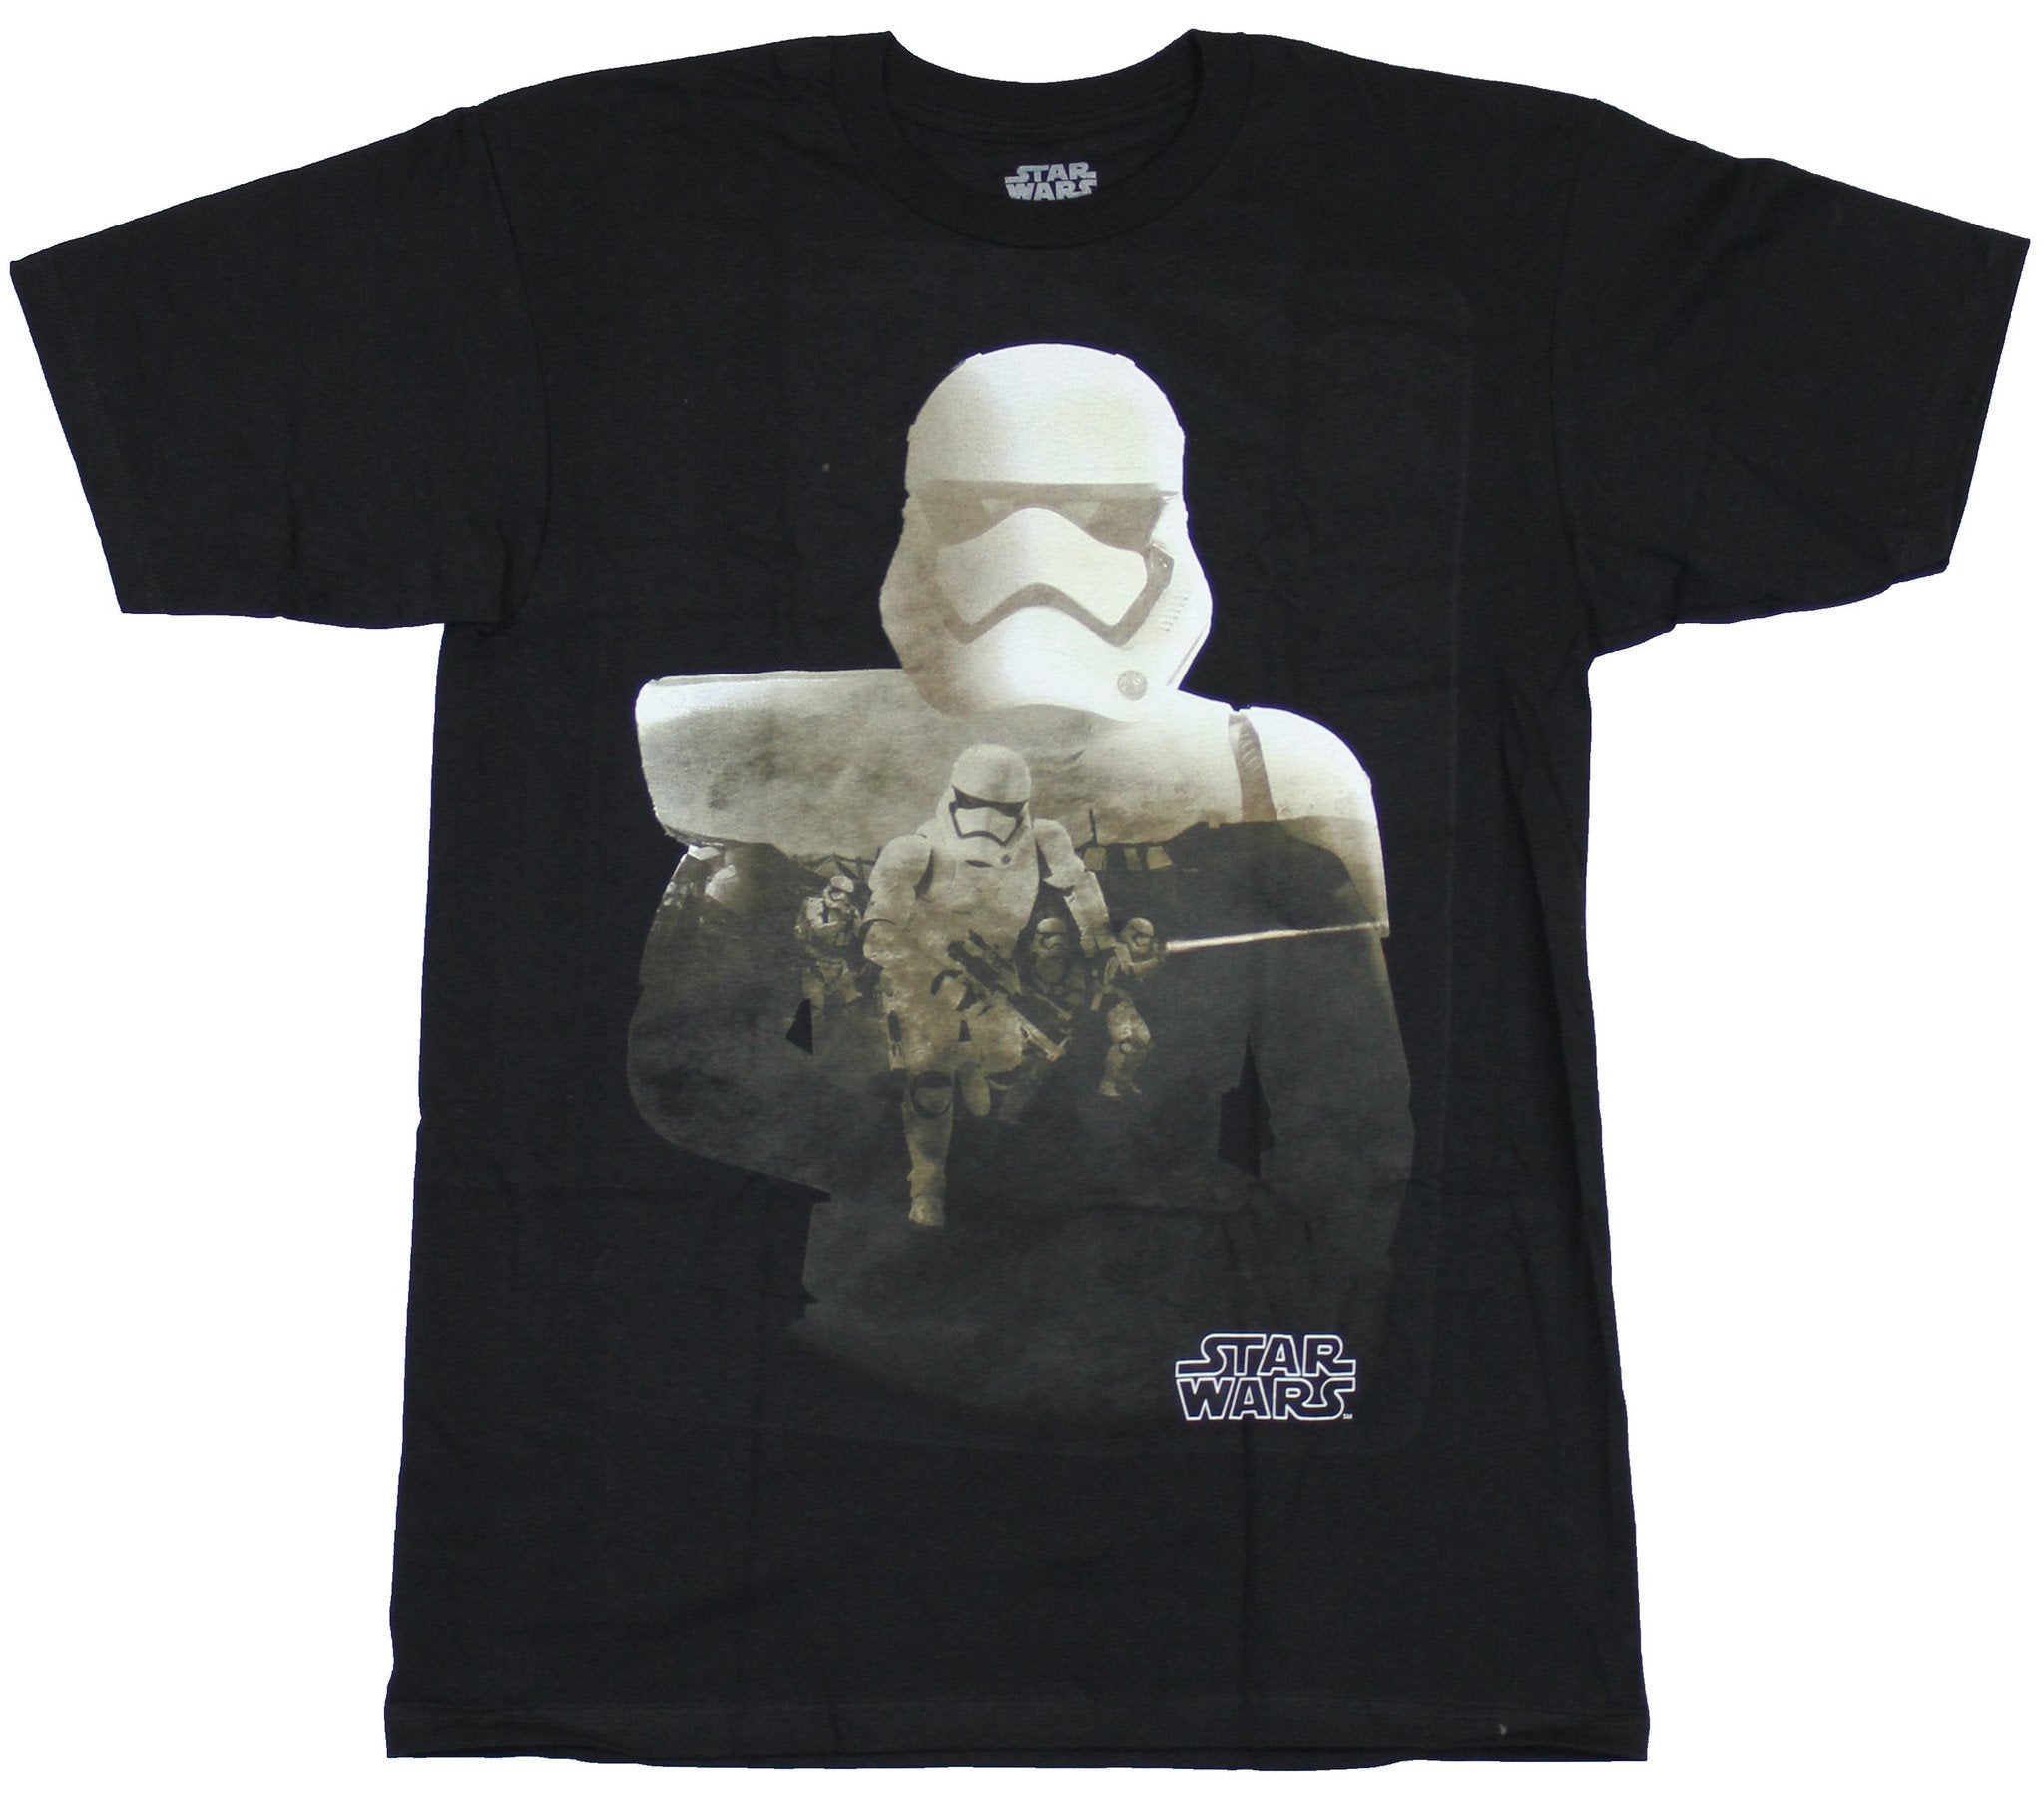 Star Wars Force Awakens Mens T-Shirt - Stormtrooper Action Filled Silhouette